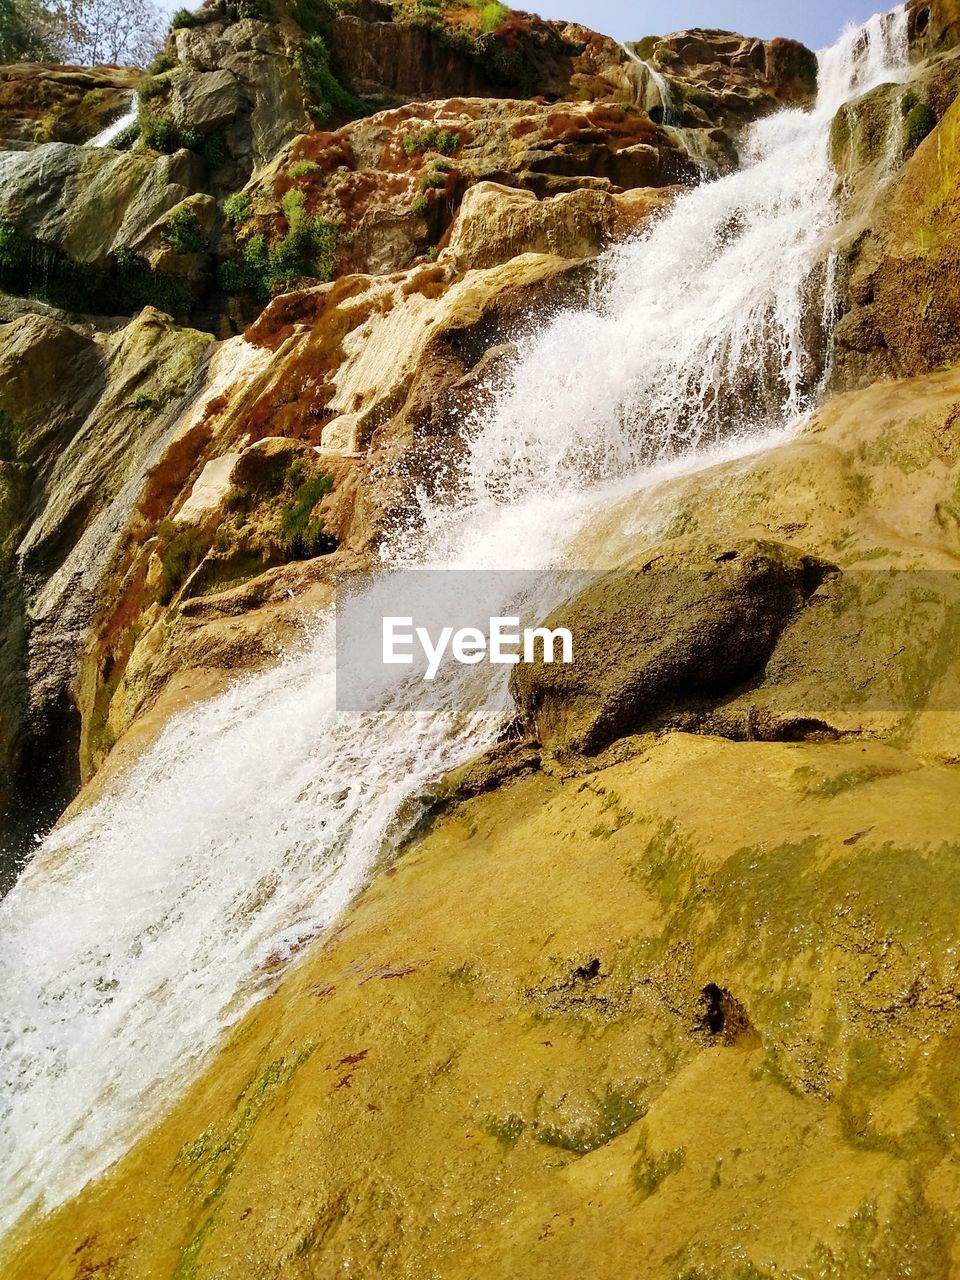 SCENIC VIEW OF WATER FLOWING THROUGH WATERFALL